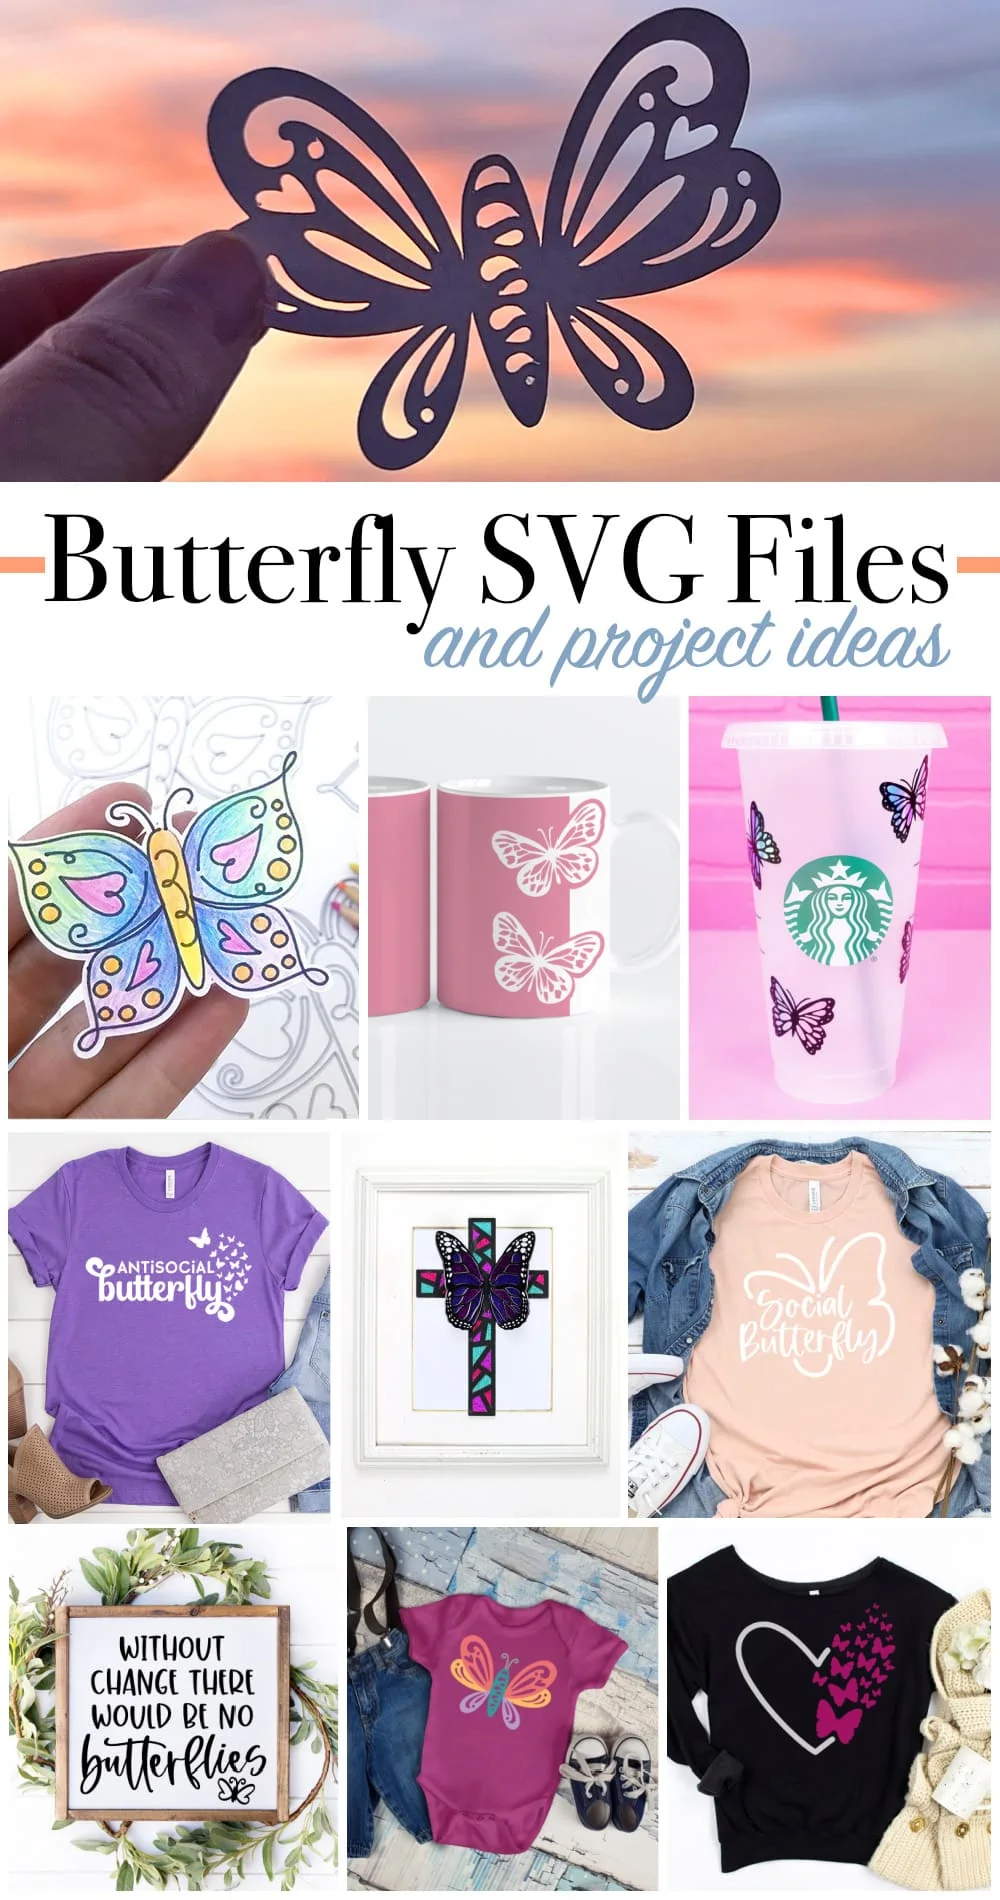 Butterfly SVG Files to craft with